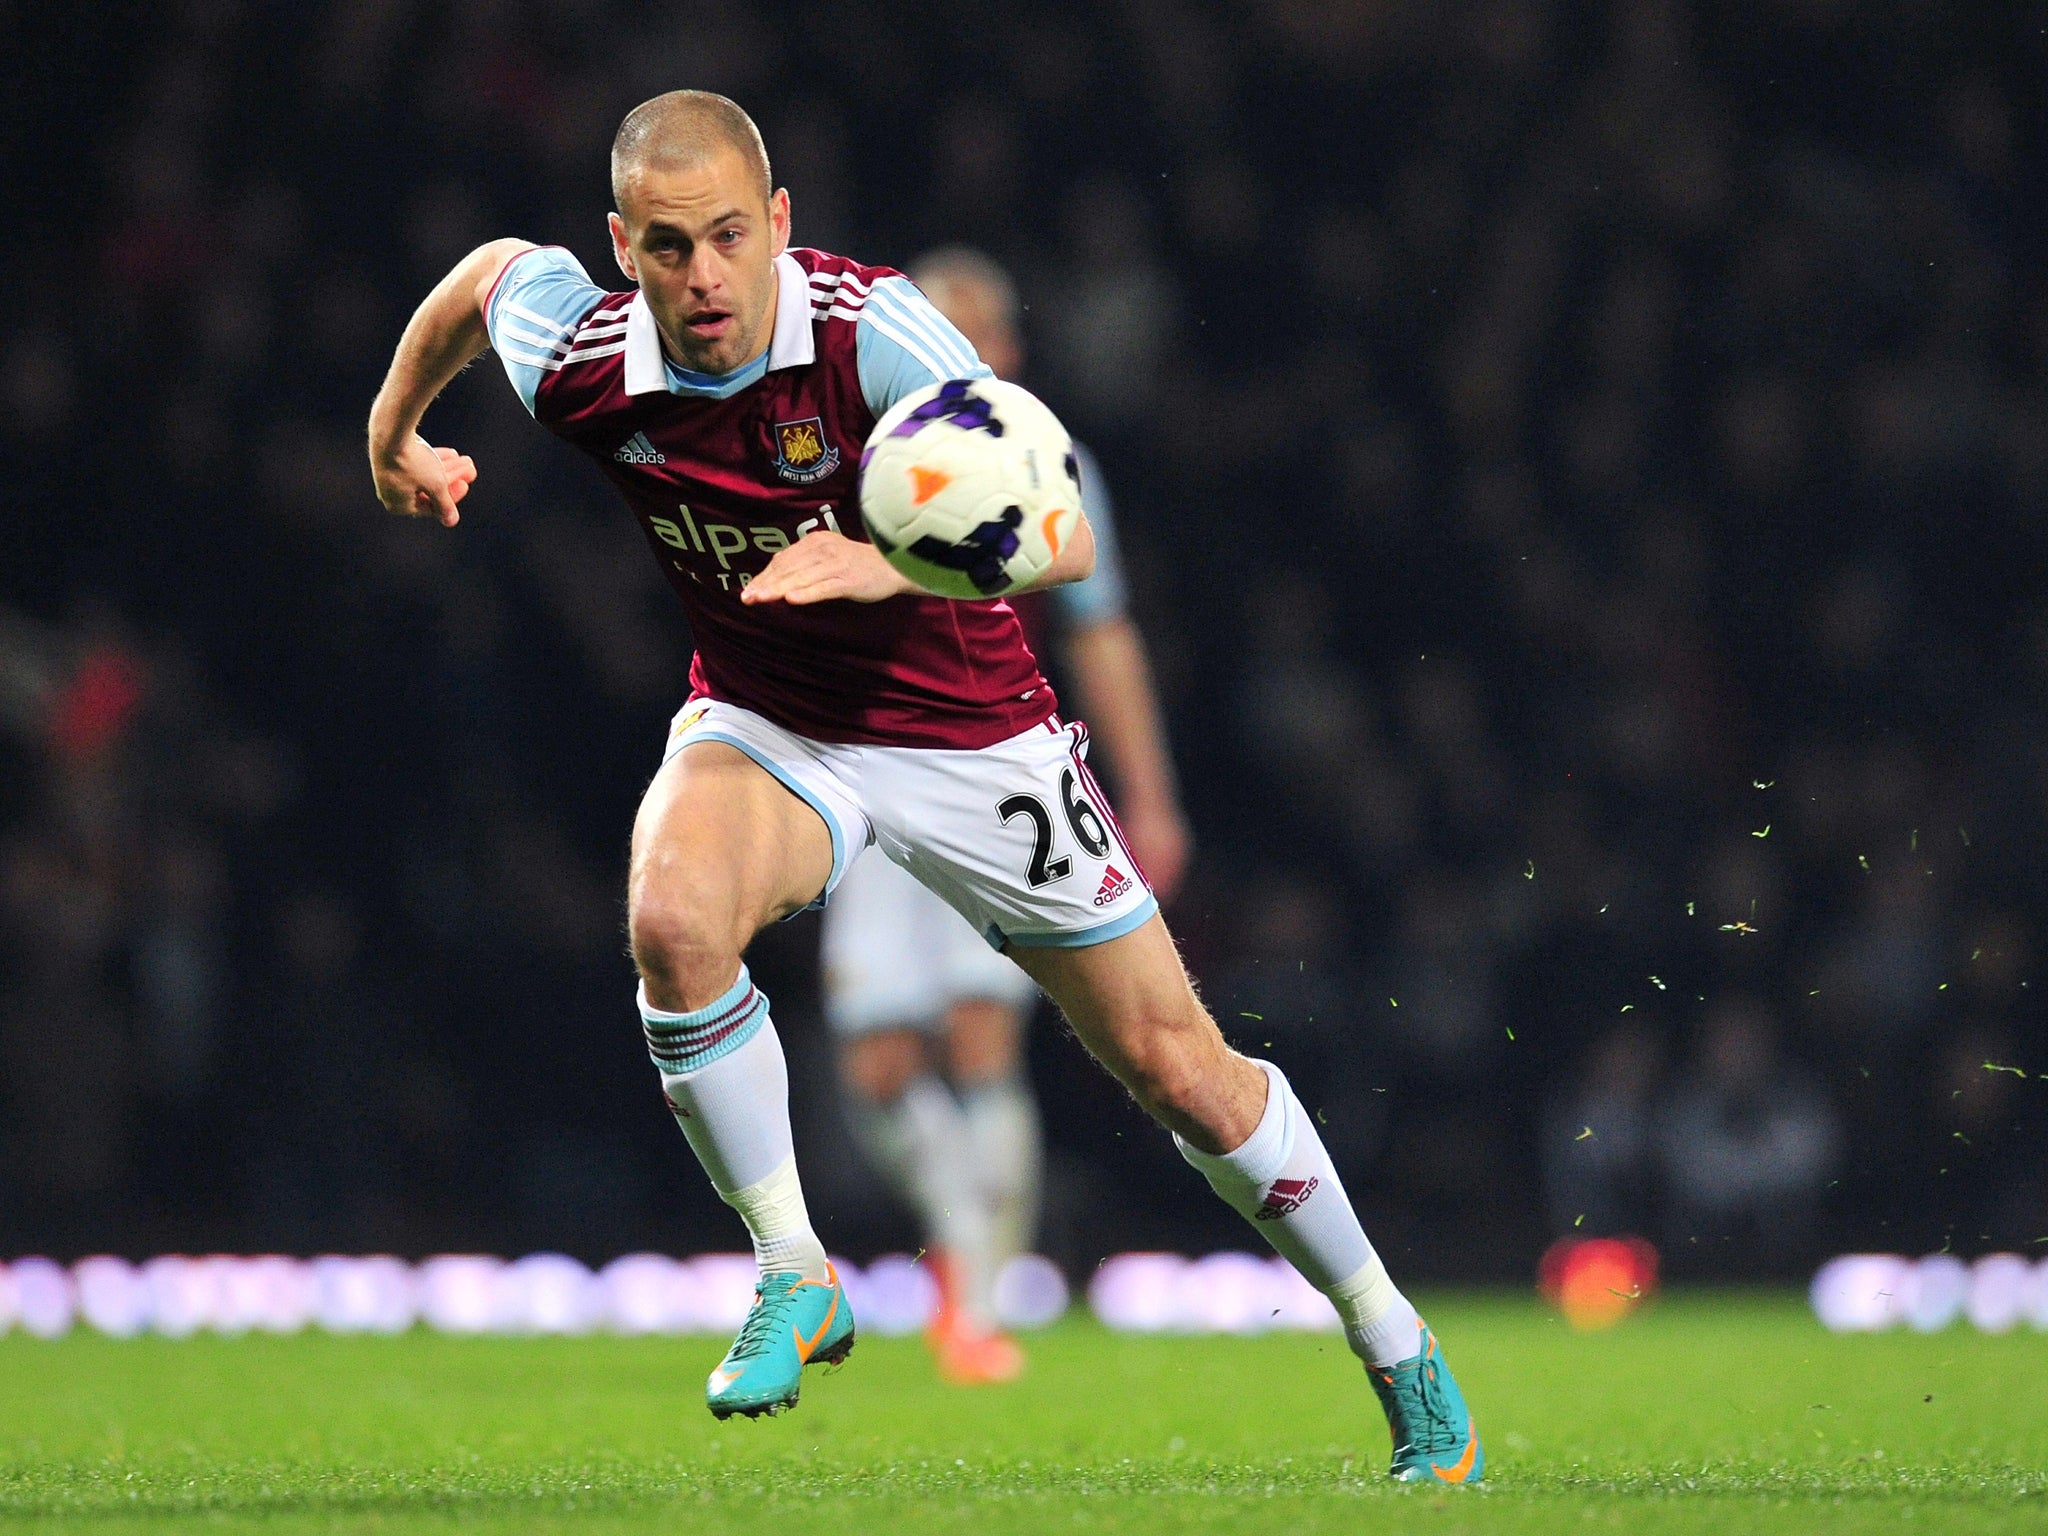 Joe Cole – 5: On for Diame on what could be his left appearance as a West Ham United player.